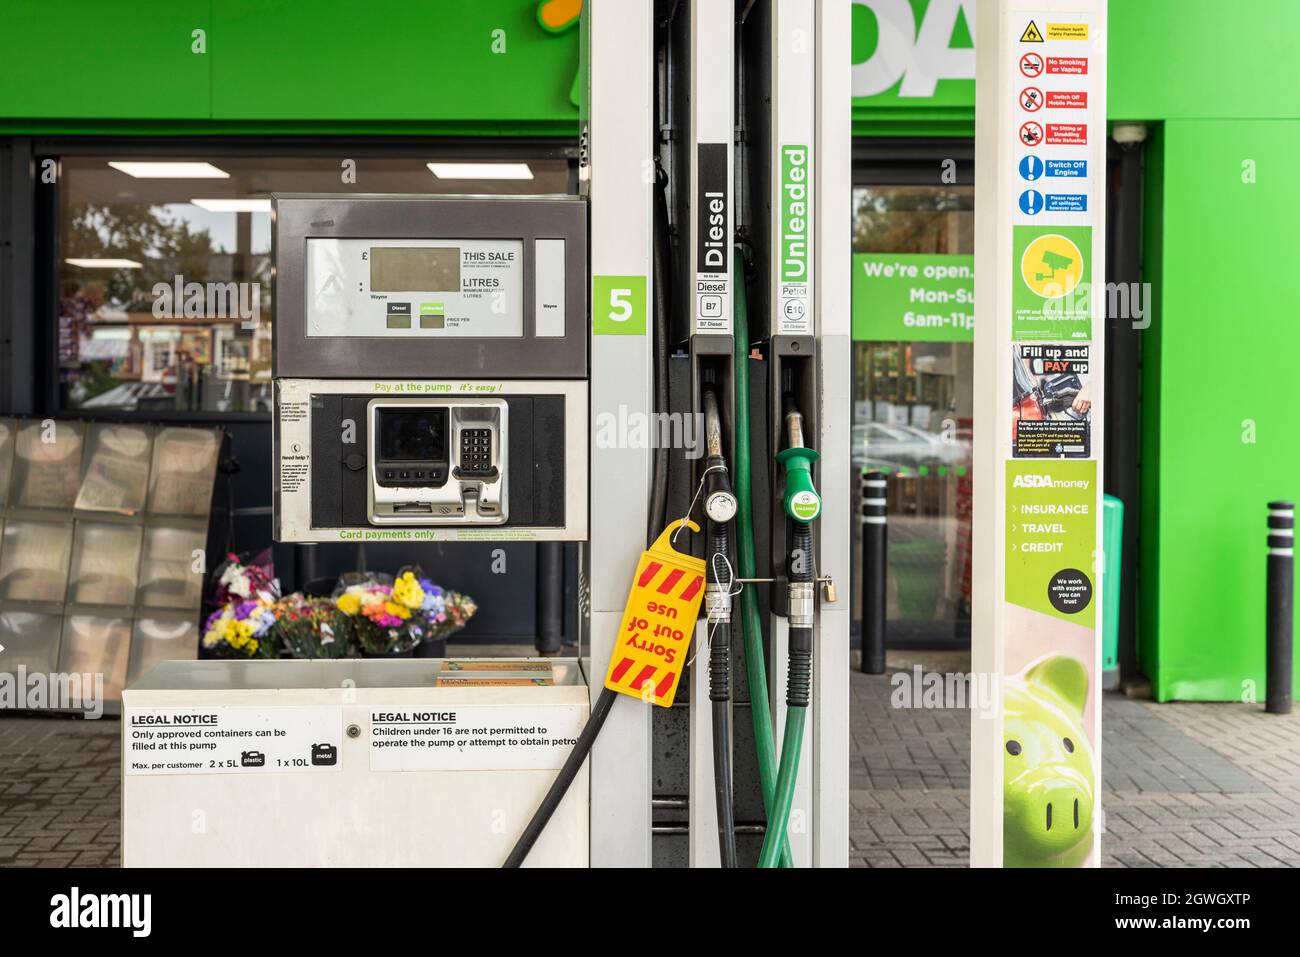 Borehamwood, Hertfordshire, UK, 3rd October 2021. Garage forecourt closed as no fule at pumps due to tanker driver shortage. Credit: Rena Pearl/Alamy Live News Stock Photo